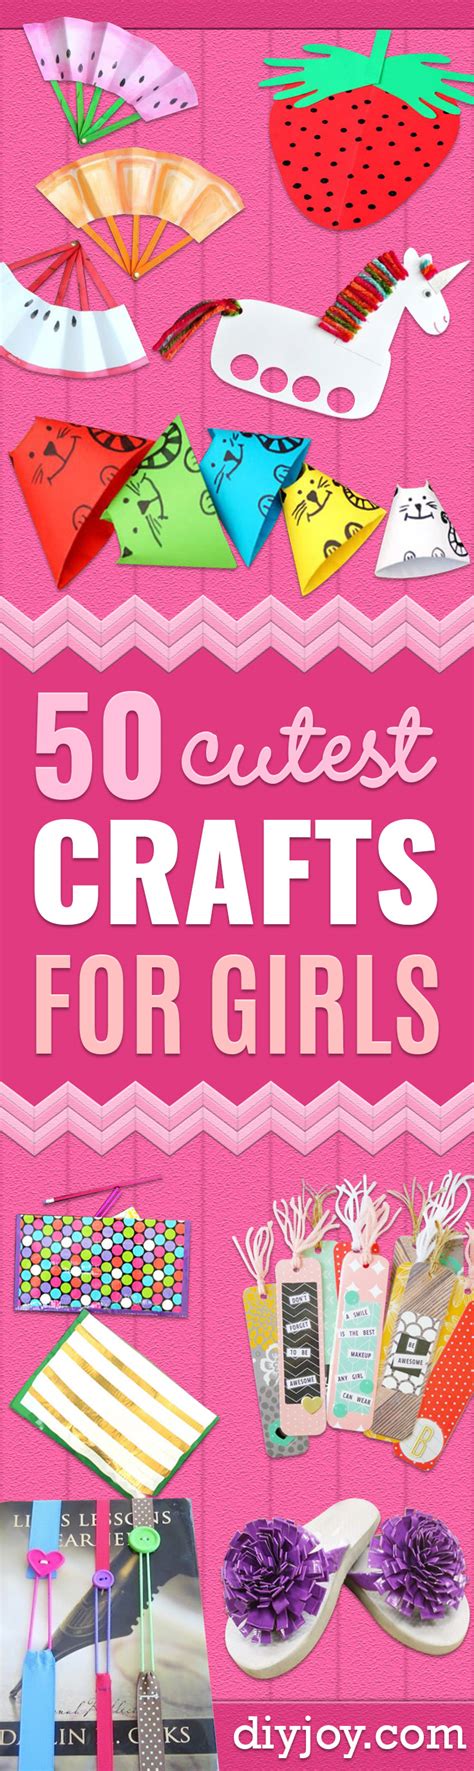 50 Best Girls Crafts Creative And Easy Diy Ideas For A Girl To Make